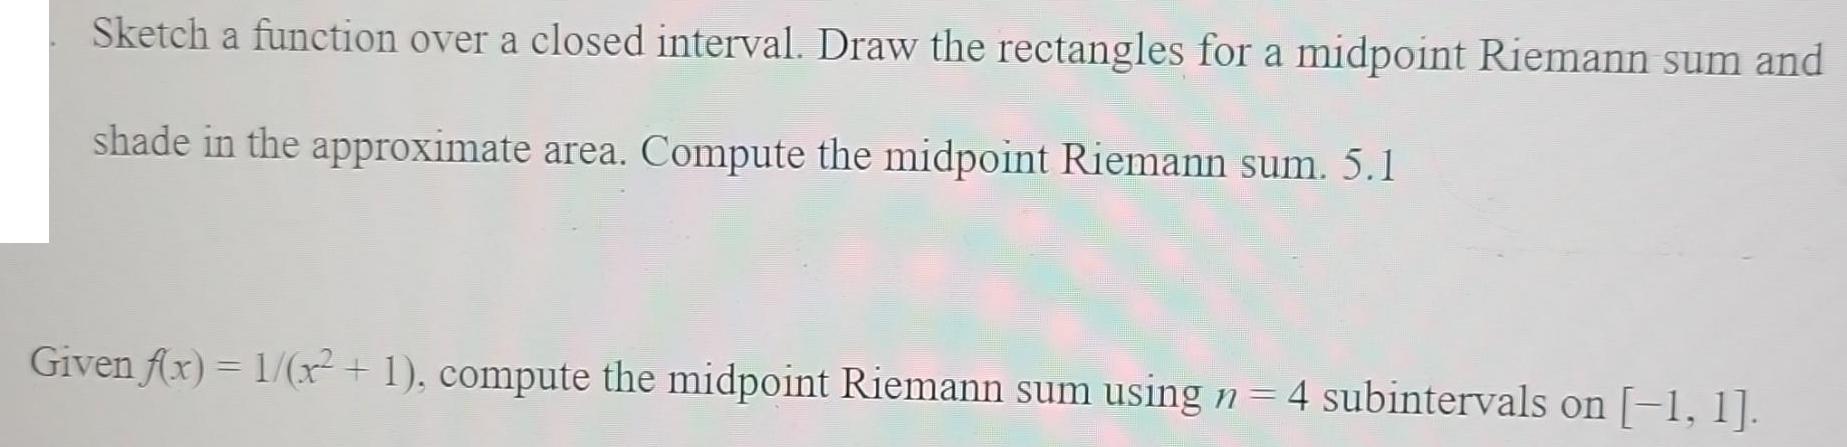 Sketch a function over a closed interval. Draw the rectangles for a midpoint Riemann sum and shade in the